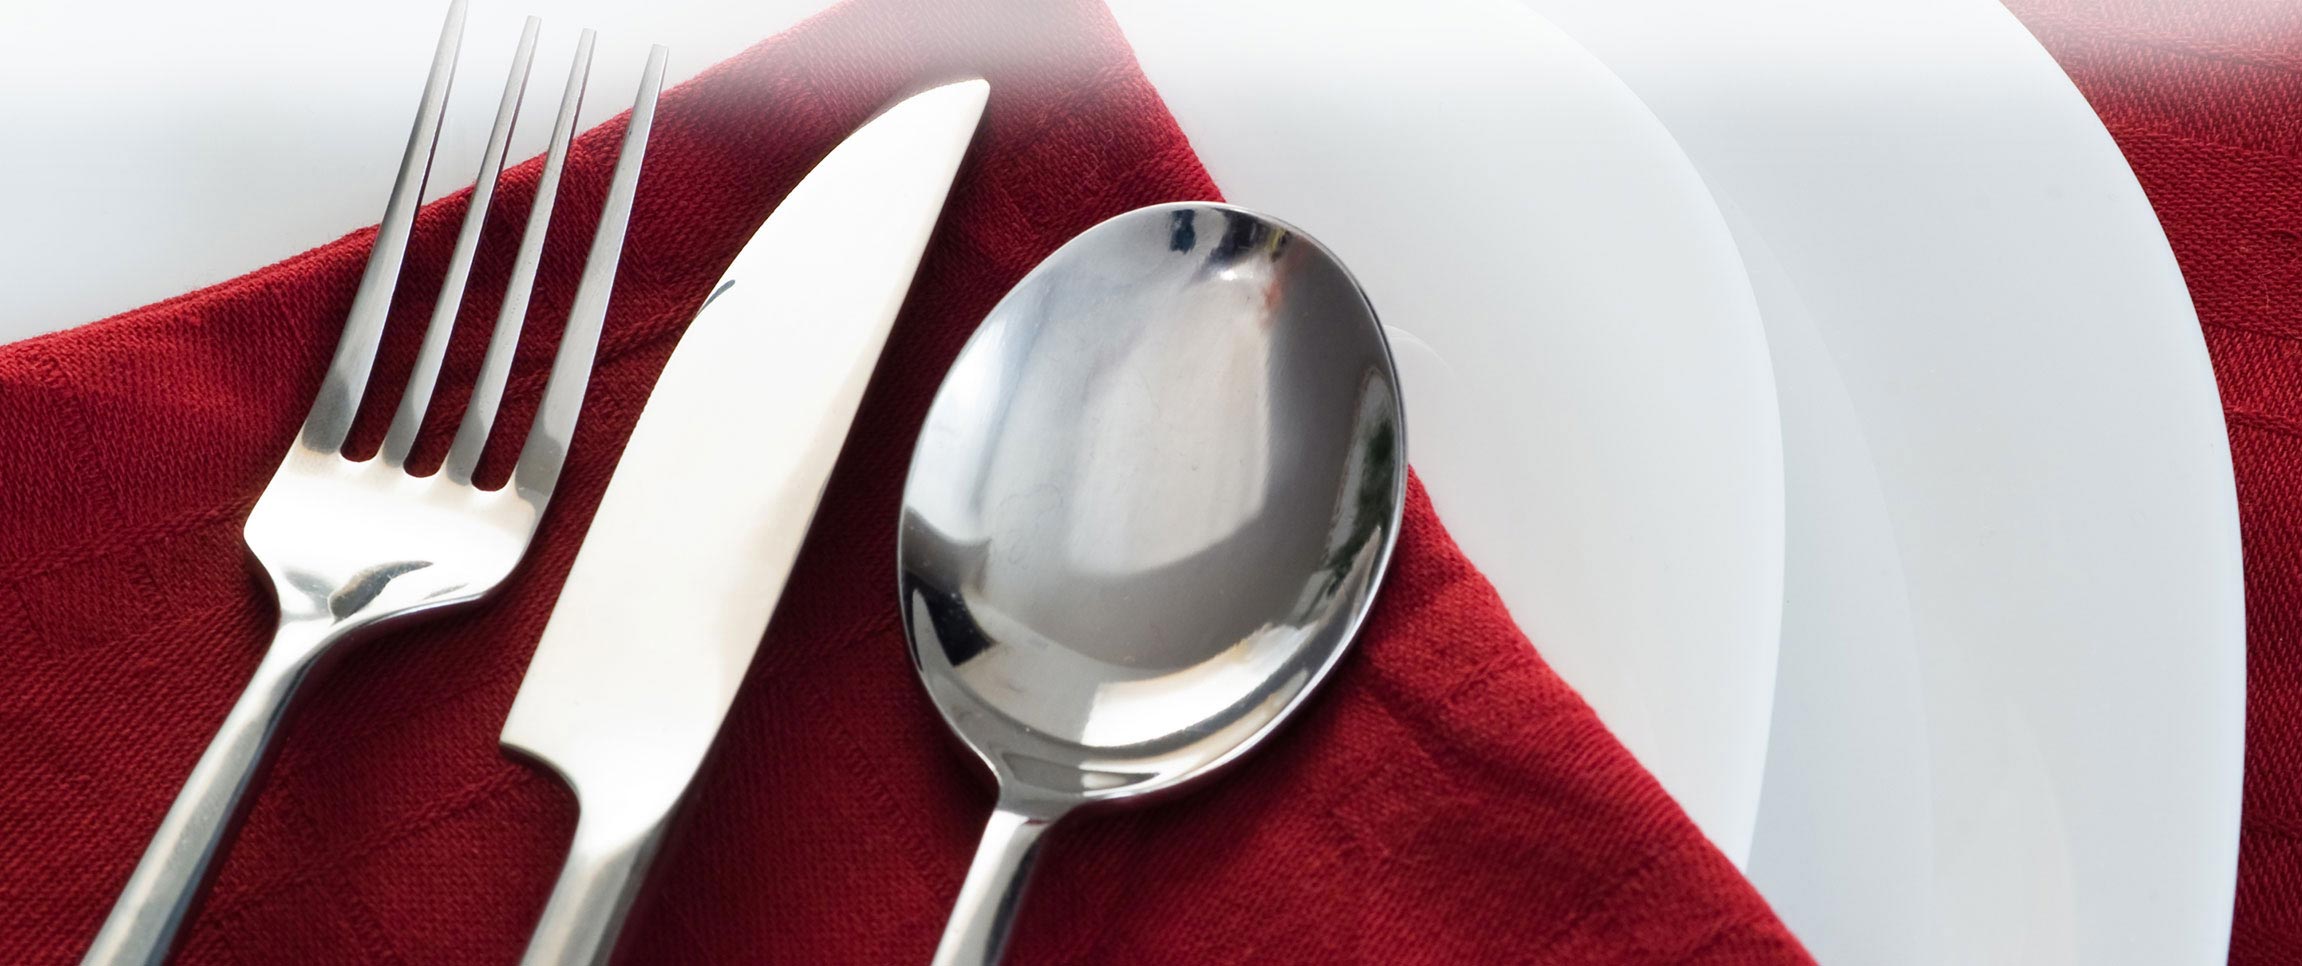 Choosing and Caring For Flatware